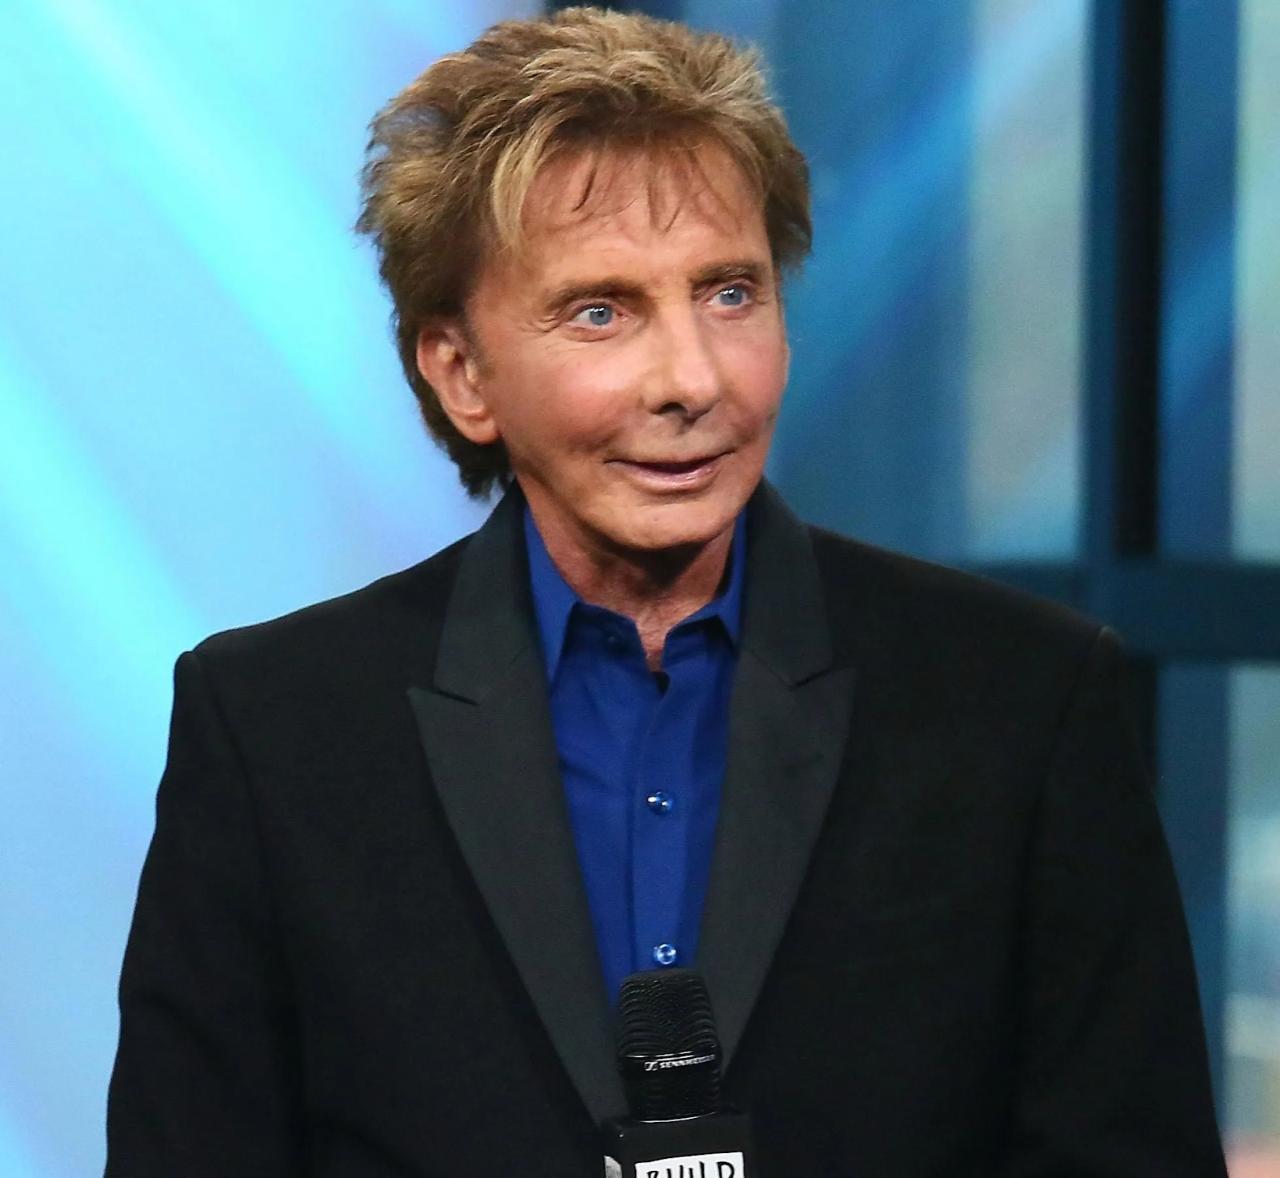 who is barry manilow husband,barry manilow young,barry manilow daughter,how old is barry manilow husband,barry manilow today,barry manilow children,barry manilow net worth 2023,barry manilow age net worth,barry manilow net worth,barry manilow wealth,barry manilow personal wealth,barry manilow&#039;s net worth,what is barry manilow&#039;s net worth,how much is barry manilow&#039;s net worth